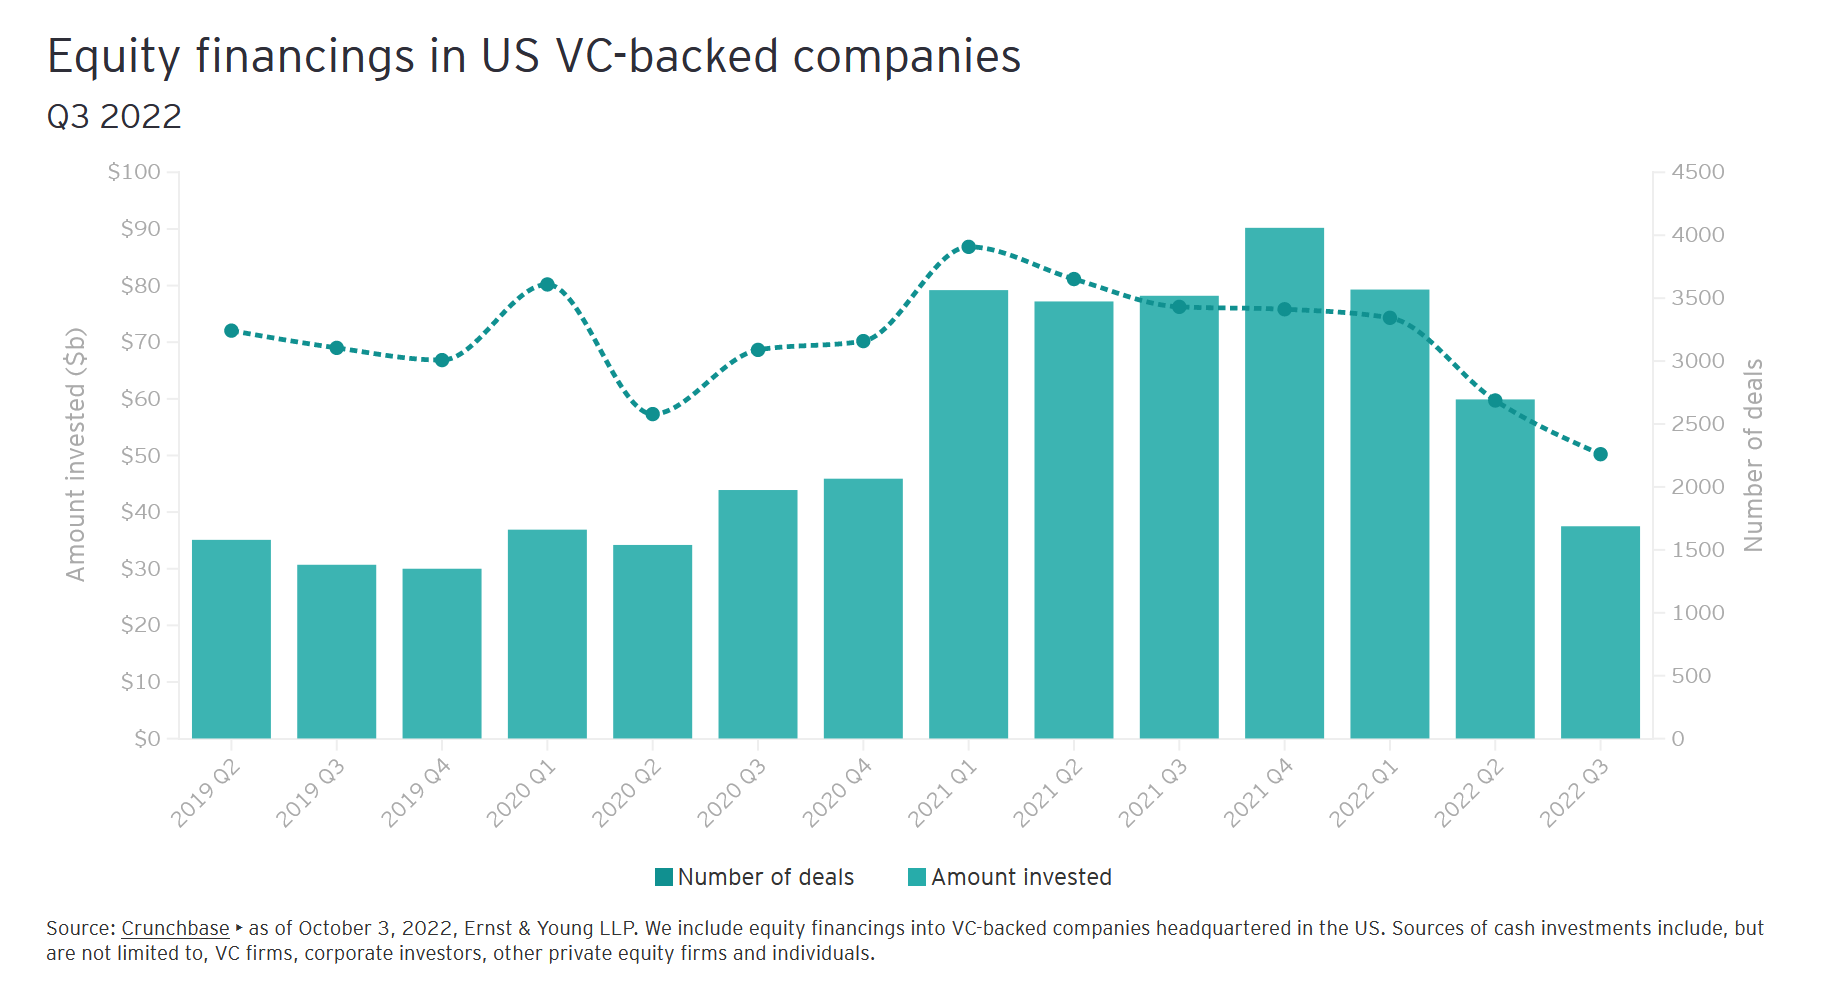 venture capital funding continues to decline rapidly